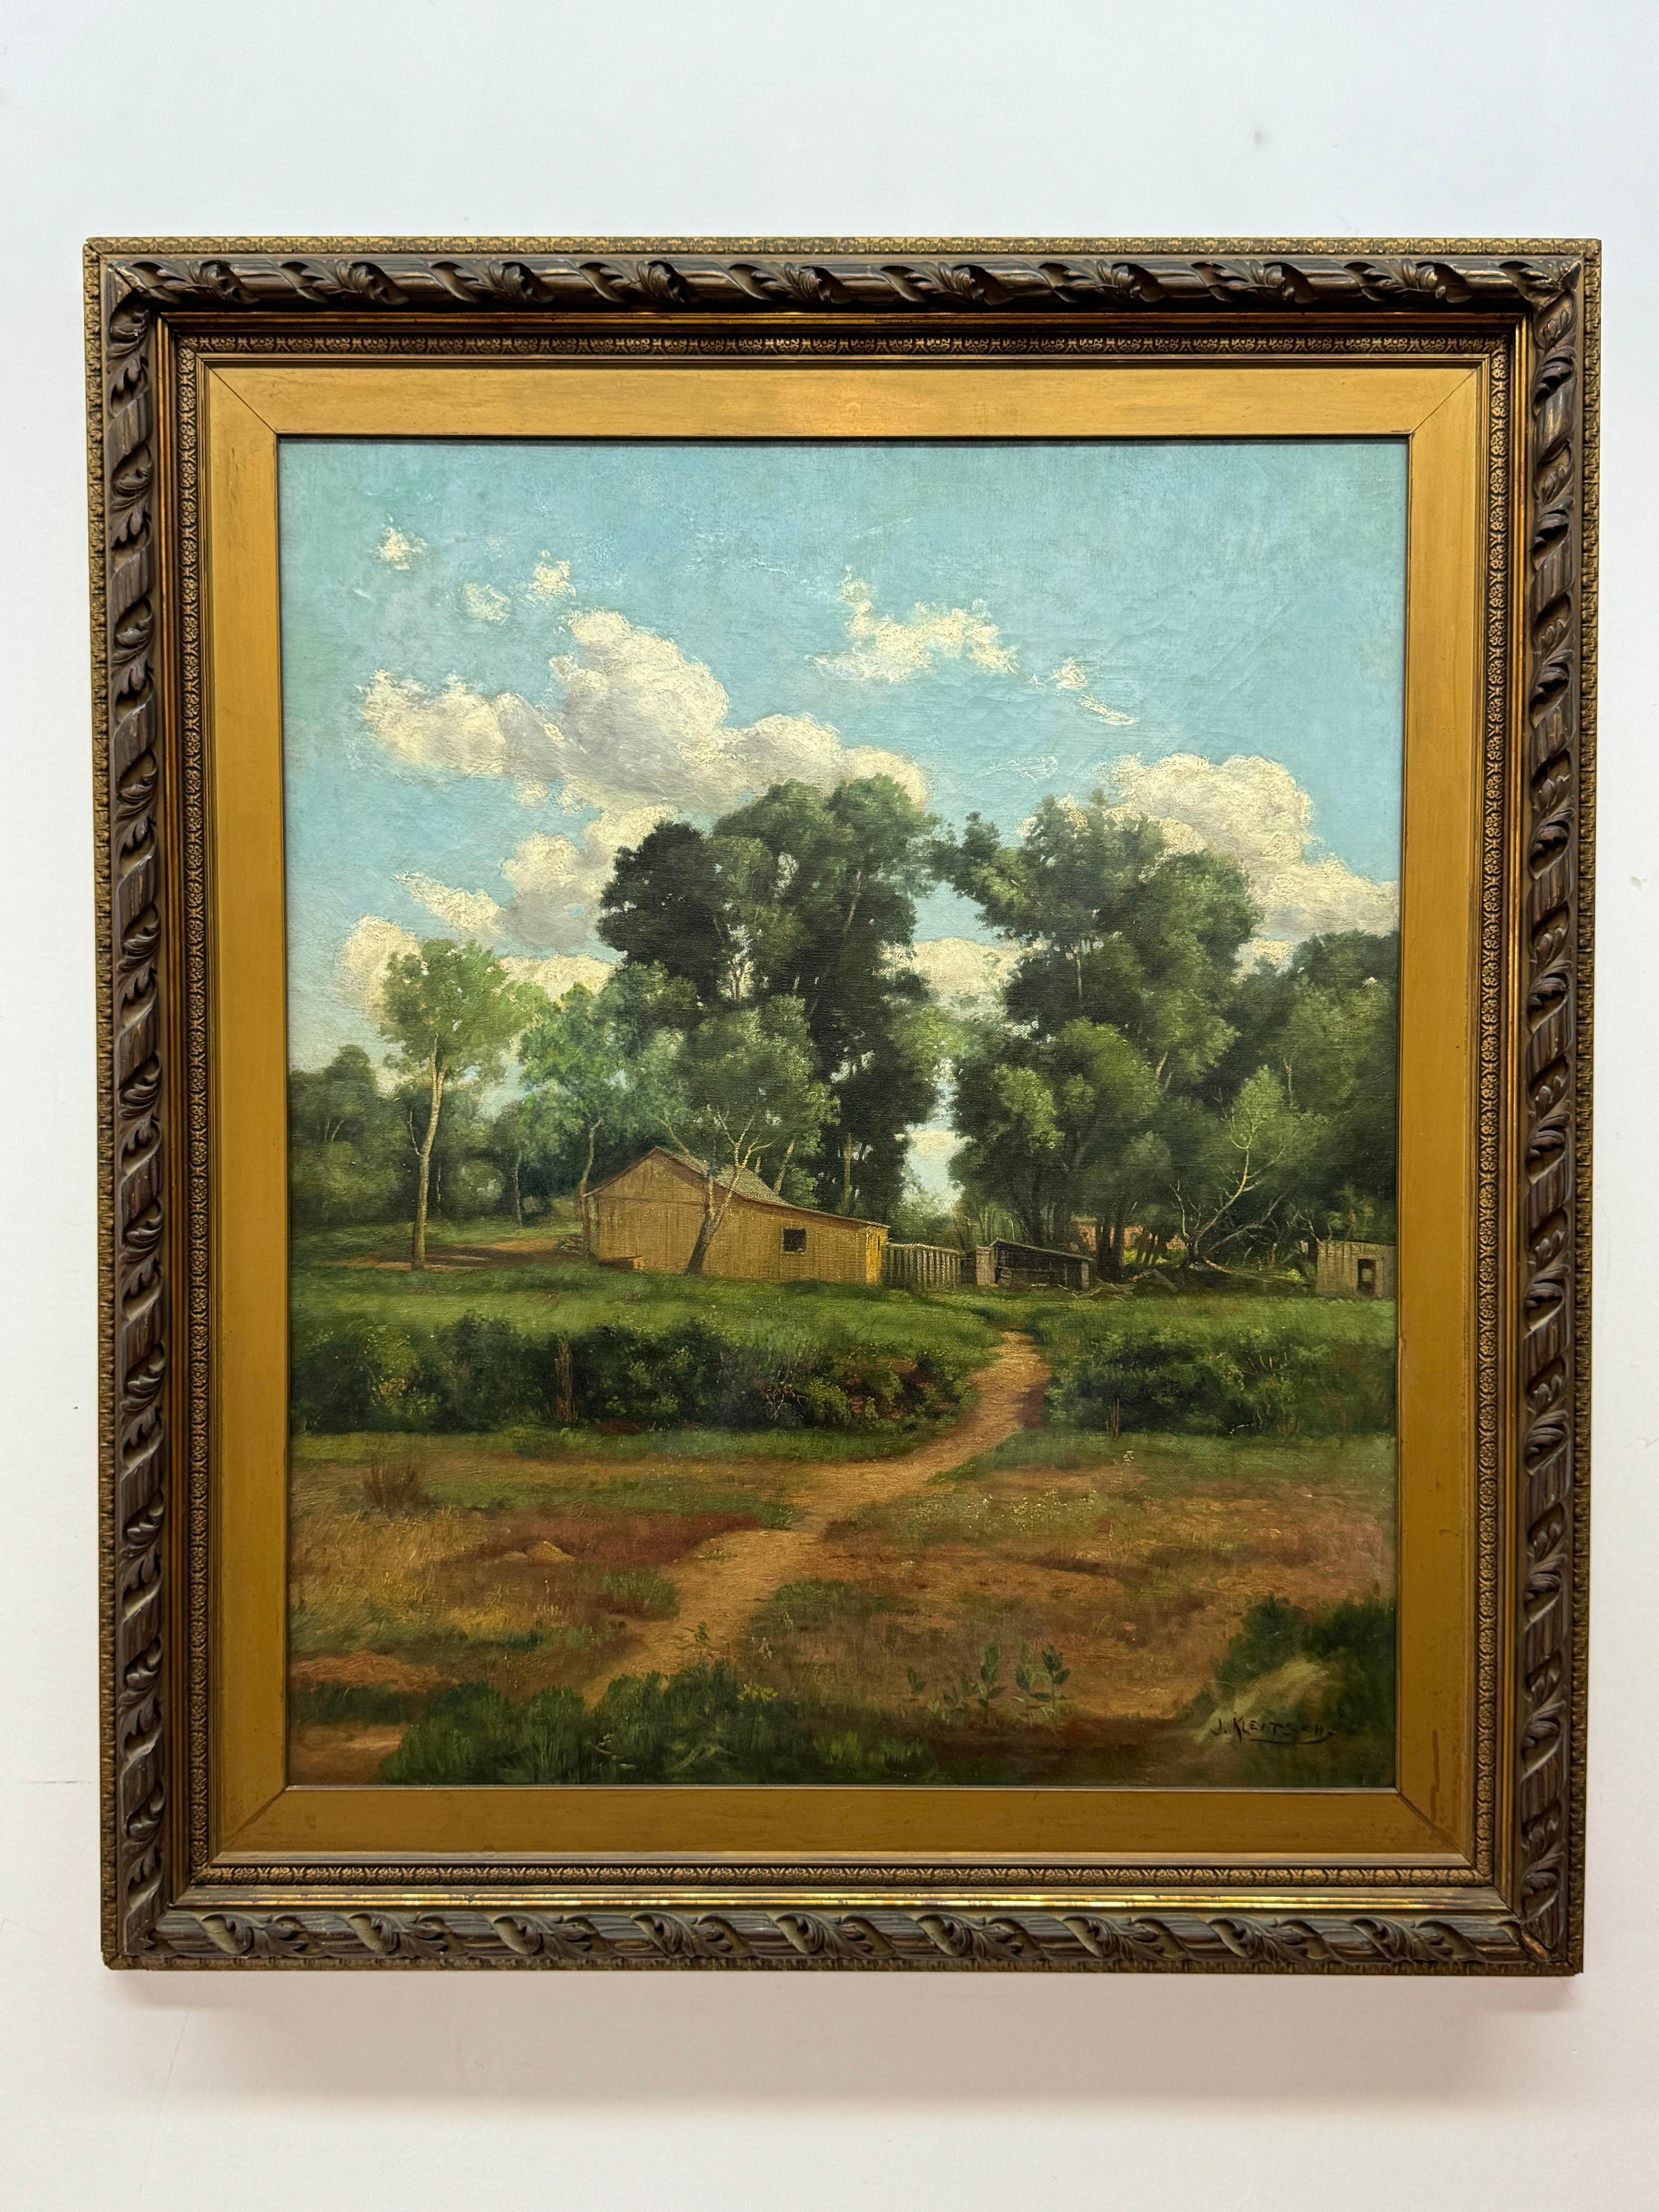 J. Kleitsch (1882-1931) Landscape of Dirt Road Leading to Barn House

Oil on Canvas 

20 x 24 unframed, 26.5 x 30.5 framed 